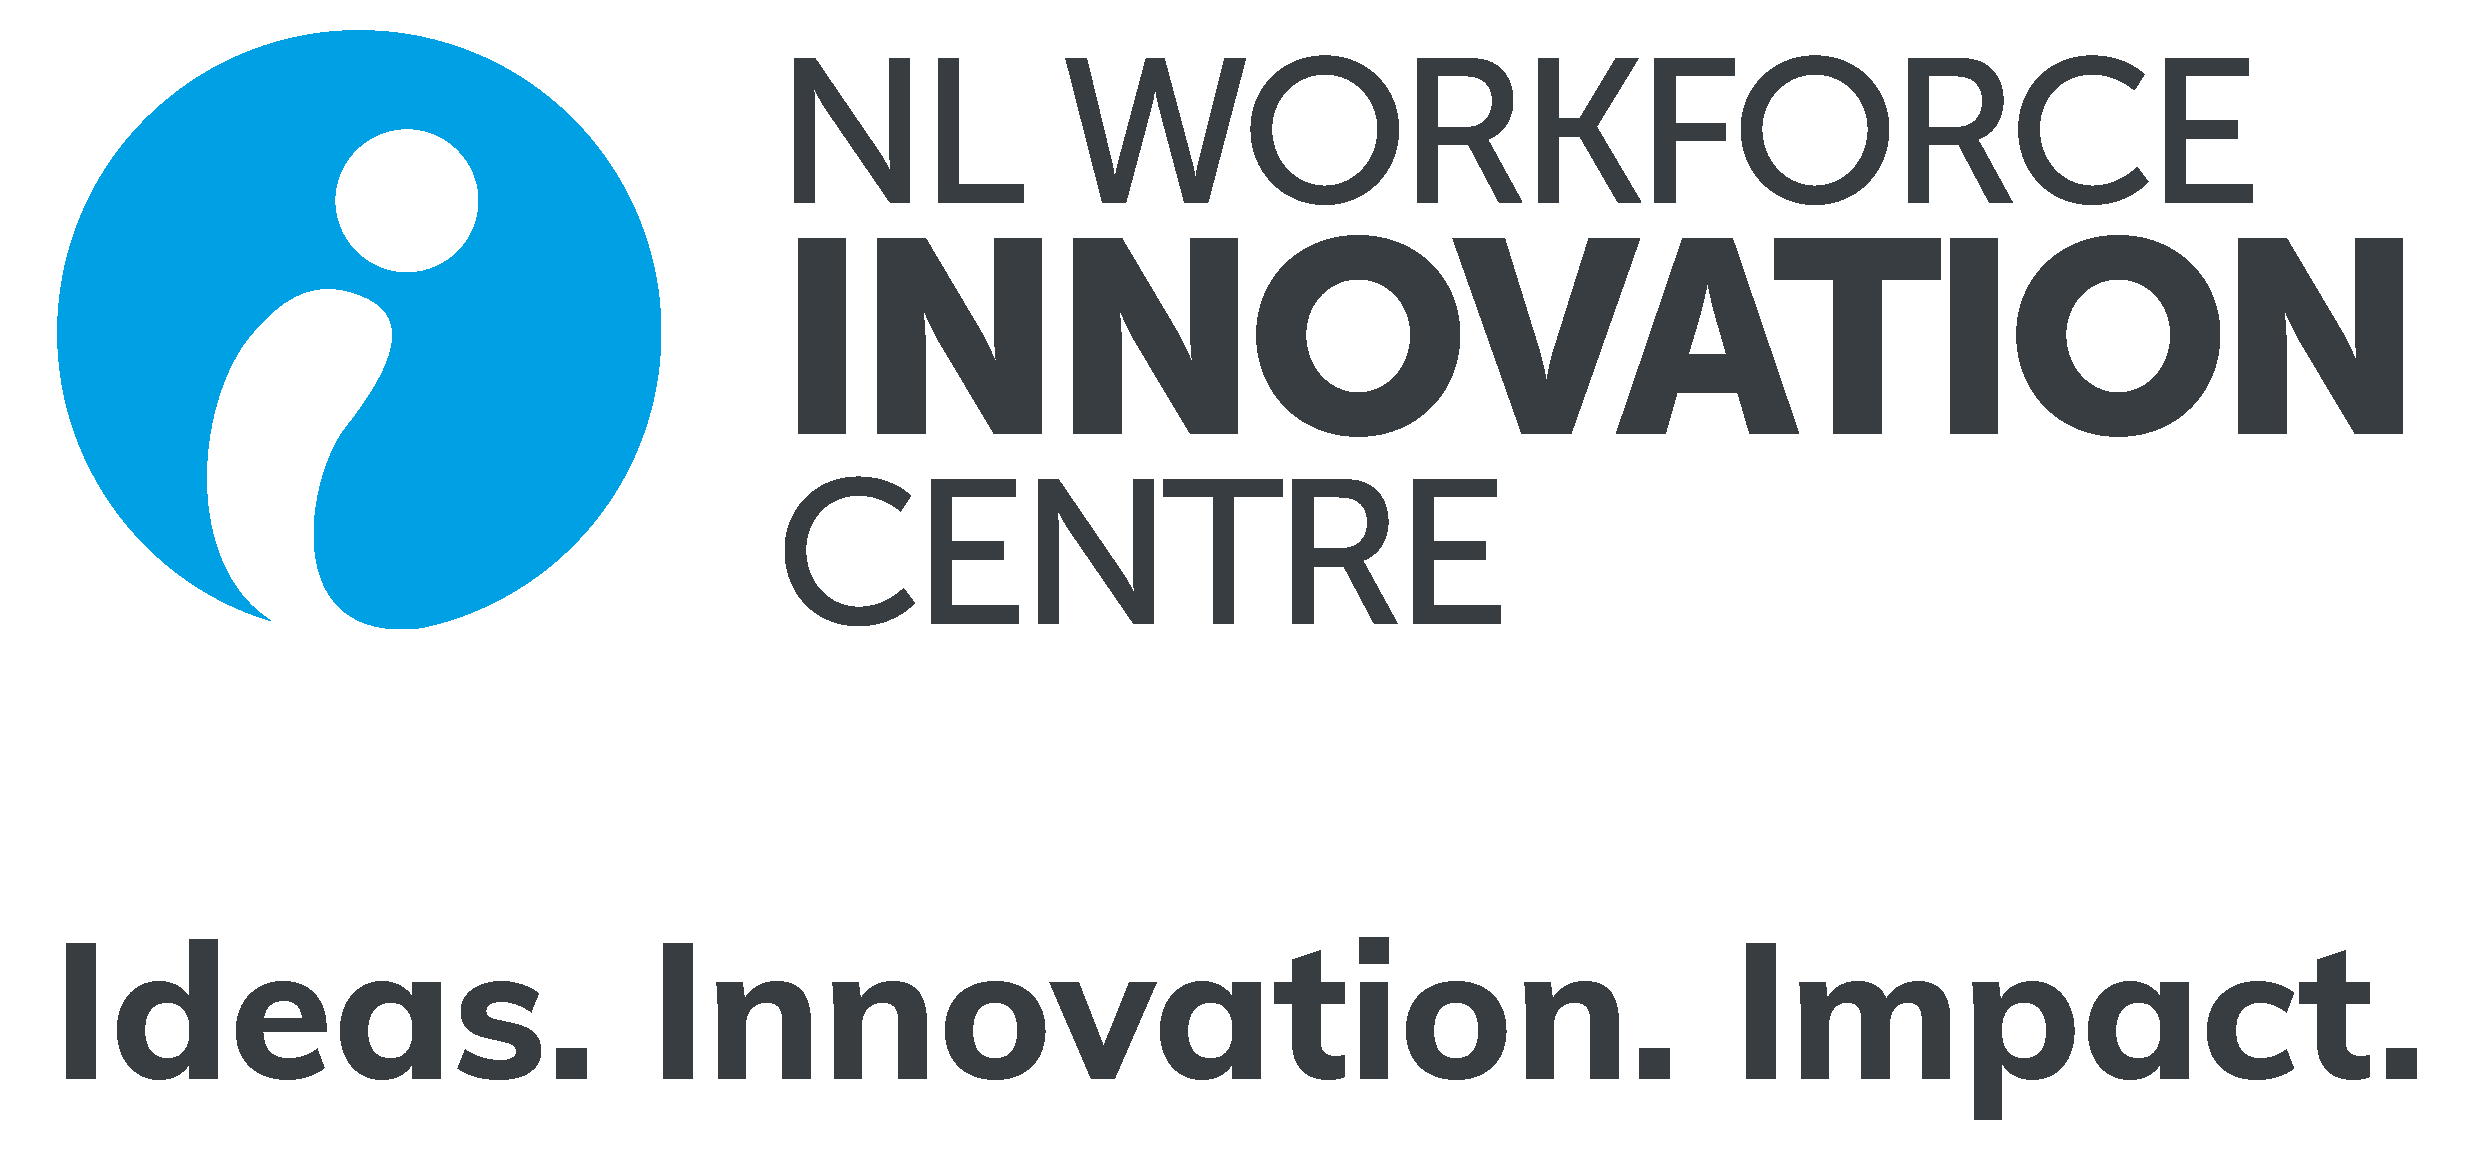 NLWIC Logo with tagline: Ideas. Innovation. Impact. These values lead our vision and mission.